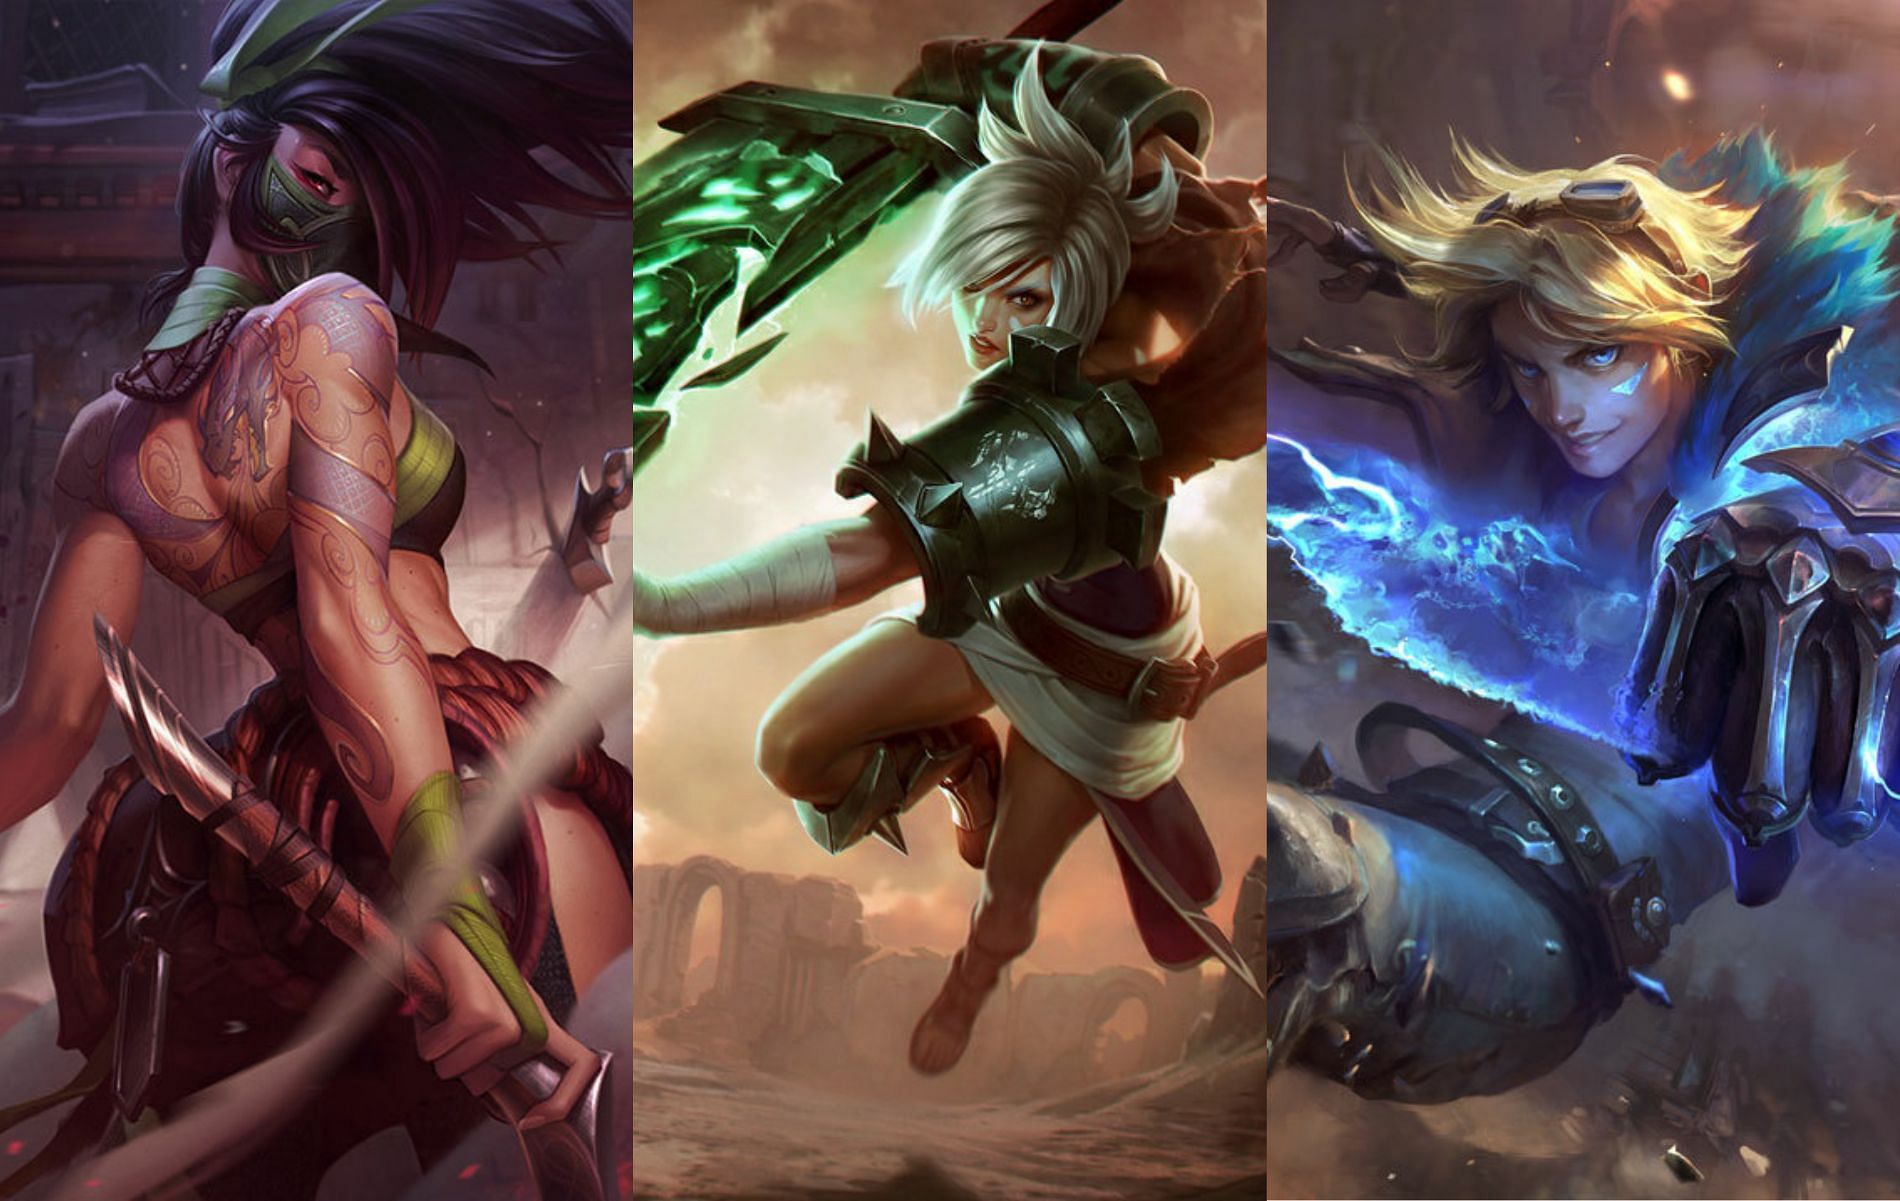 Riot's Project L: Release Date, Characters, Trailers, Leaks & More